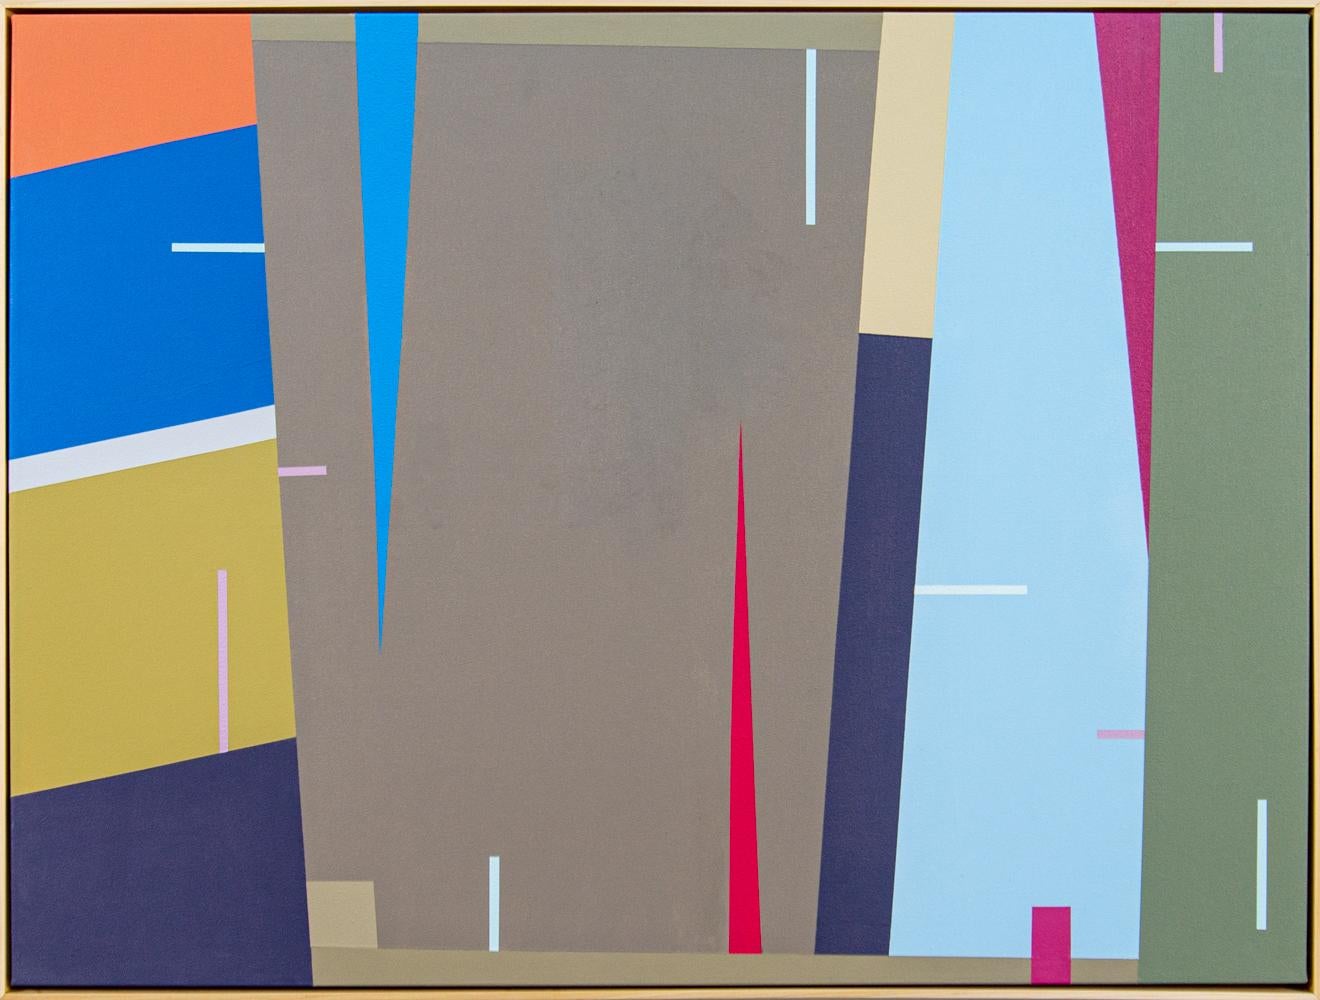 Long Live Sarastro 2 - colourful, geometric abstraction, acrylic on panel